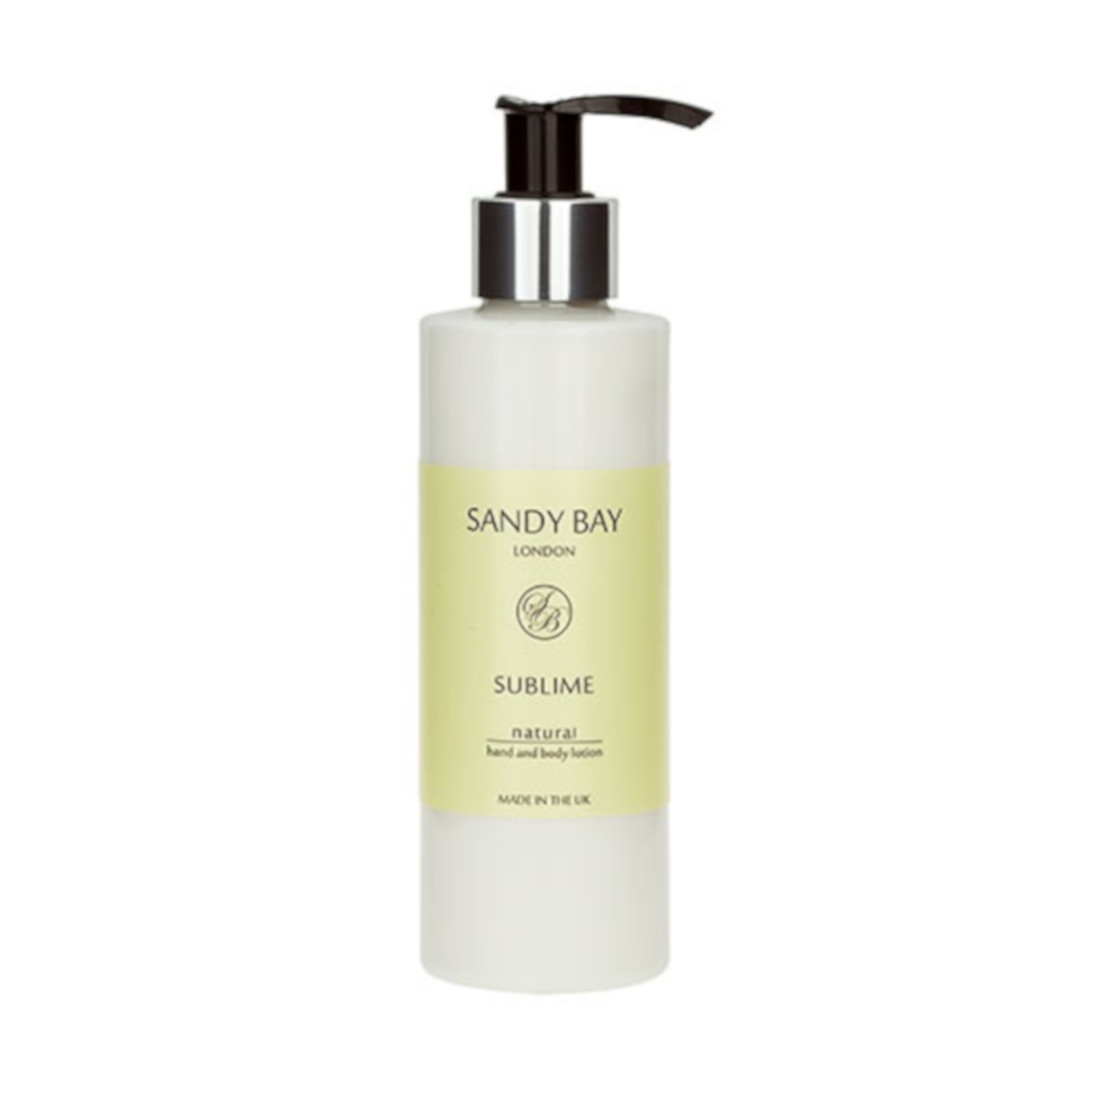 Sandy Bay Sublime 200ml Hand & Body Lotion